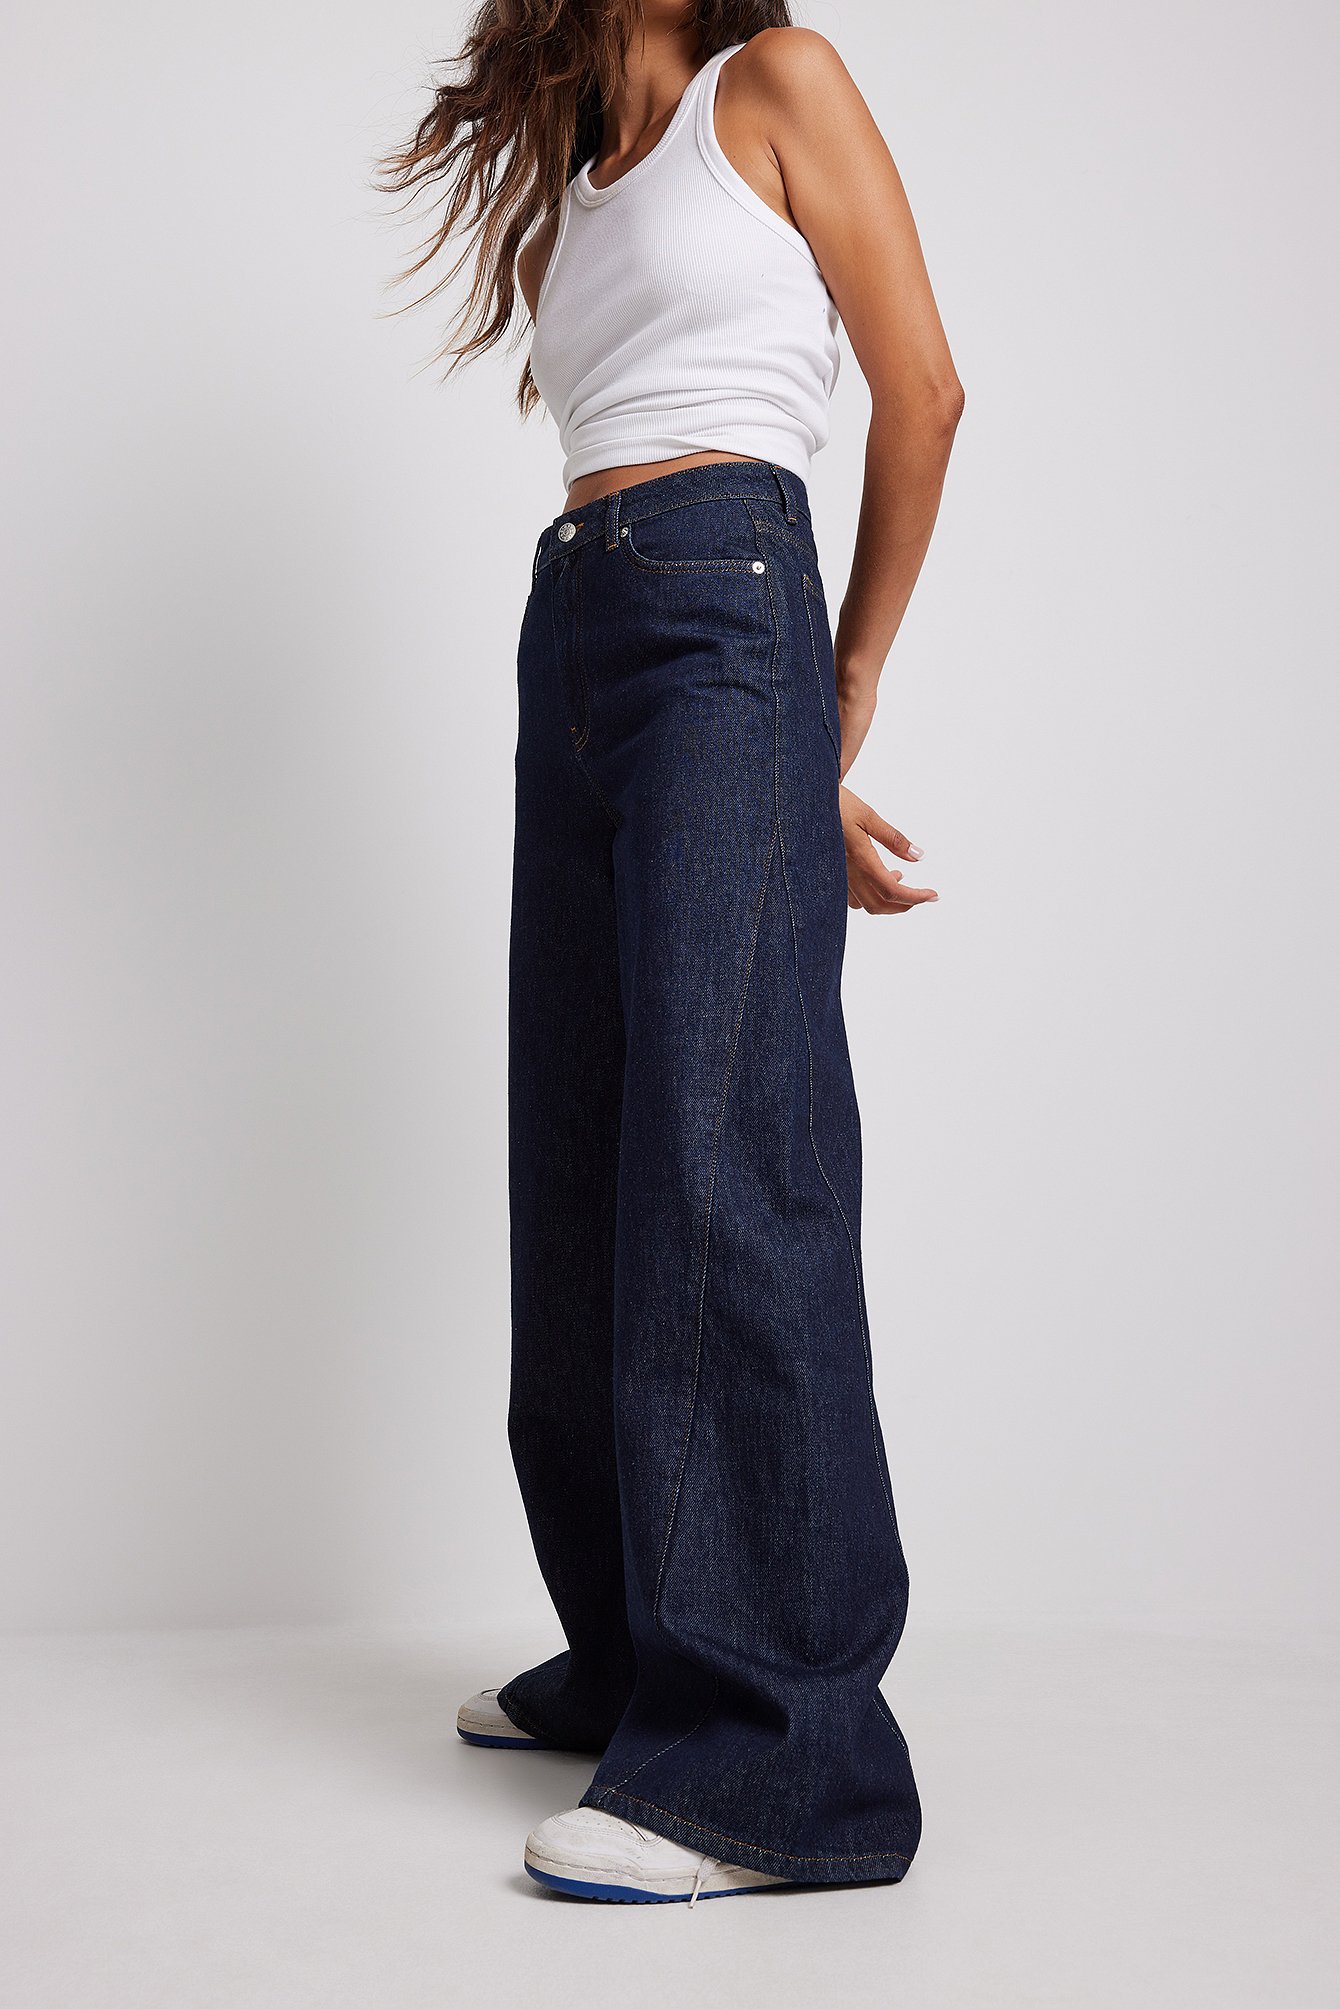 The 24 Best WideLeg Jeans to Shop This Season  Who What Wear